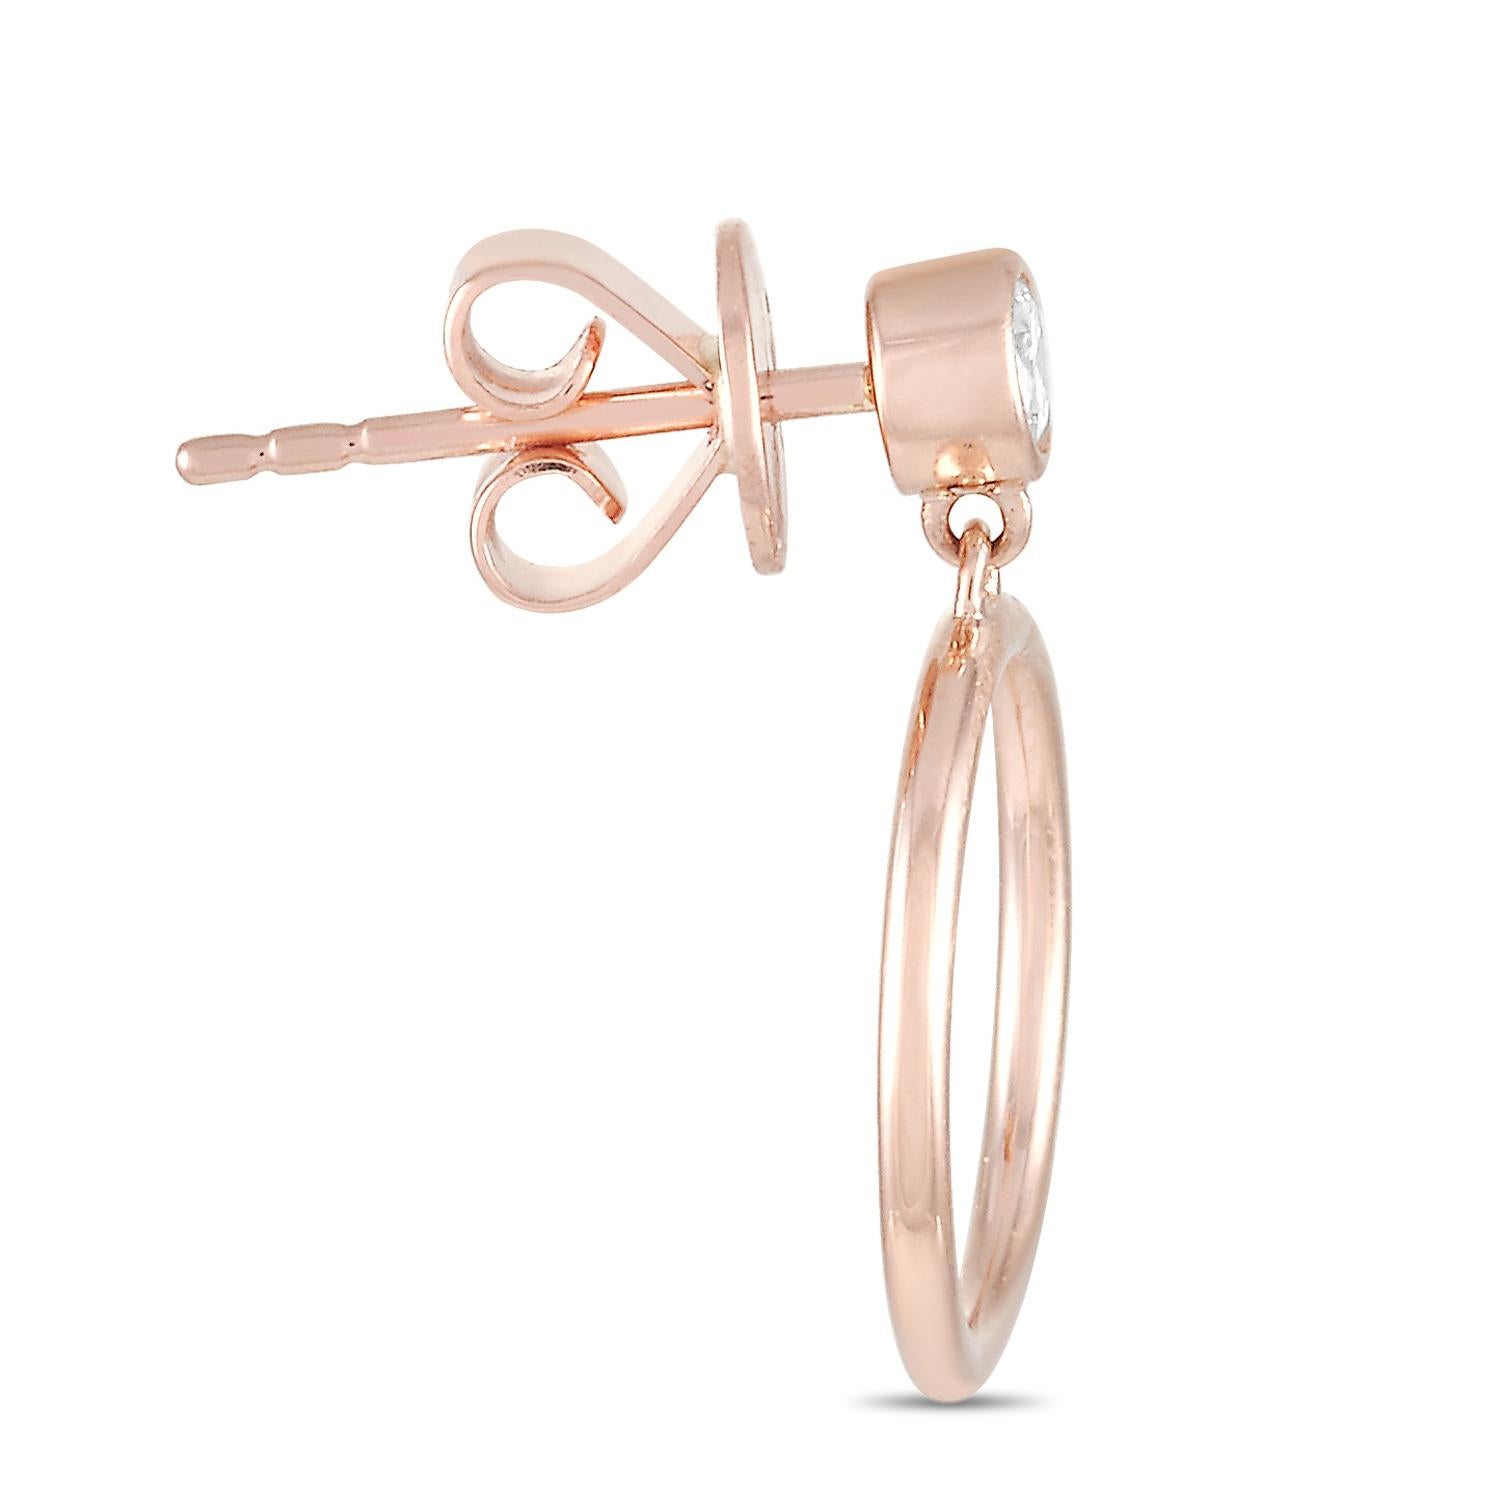 These LB Exclusive earrings are made of 14K rose gold and embellished with diamonds that amount to 0.18 carats. The earrings measure 0.63” in length and 0.50” in width and each of the two weighs 1.1 grams.
 
 The pair is offered in brand new